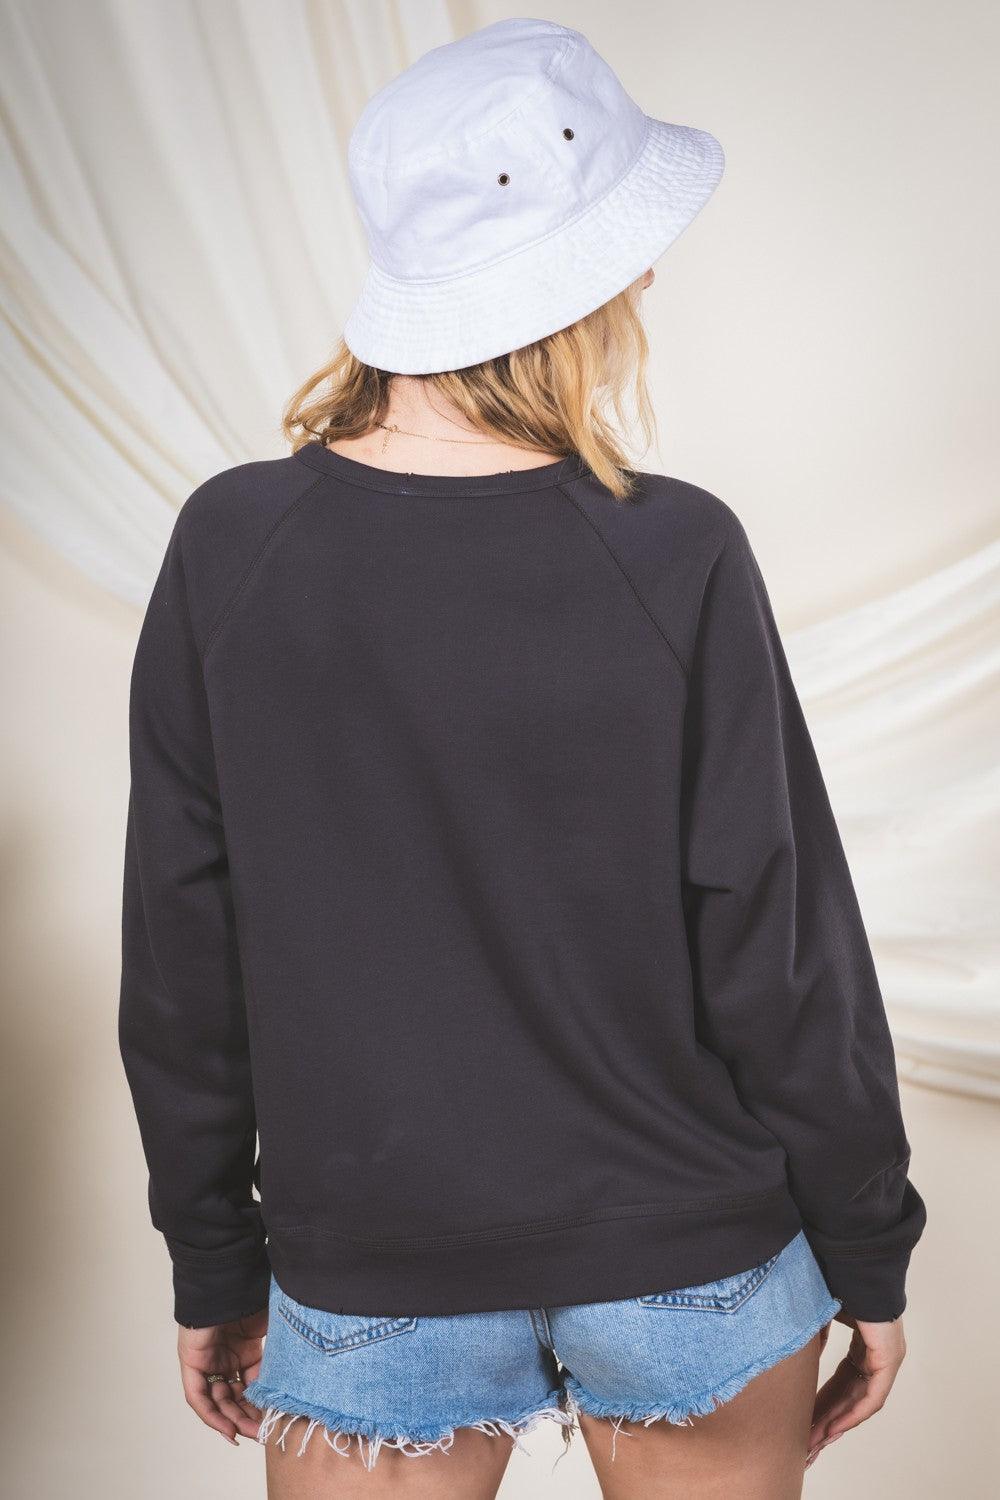 Charcoal Graphic Sweatshirt - Strawberry Moon Boutique